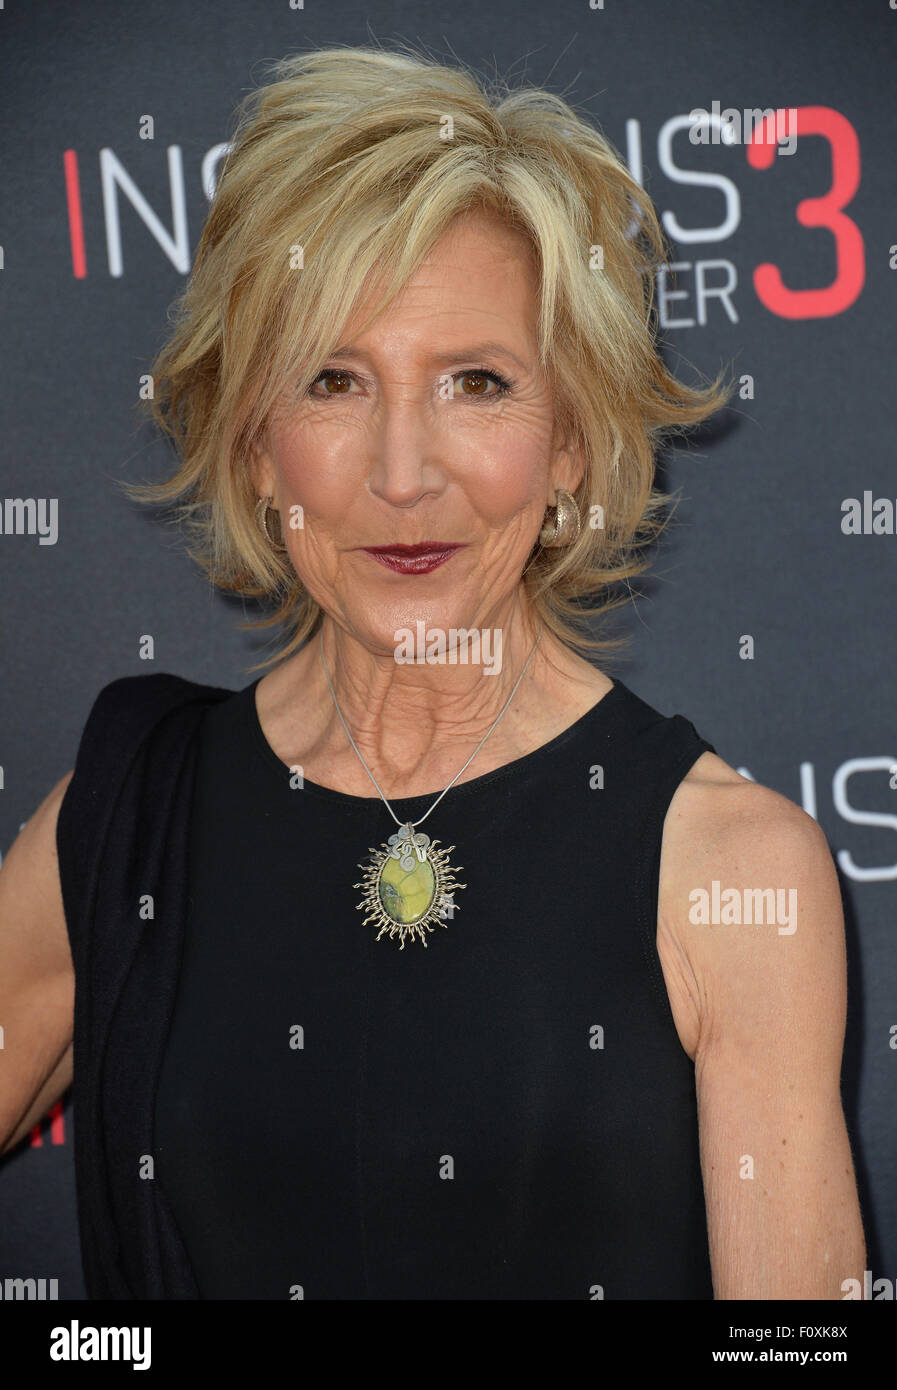 LOS ANGELES, CA - JUNE 5, 2015: Actress Lin Shaye at the world premiere of her movie Insidious Chapter 3 at the TCL Chinese Theatre, Hollywood. Stock Photo